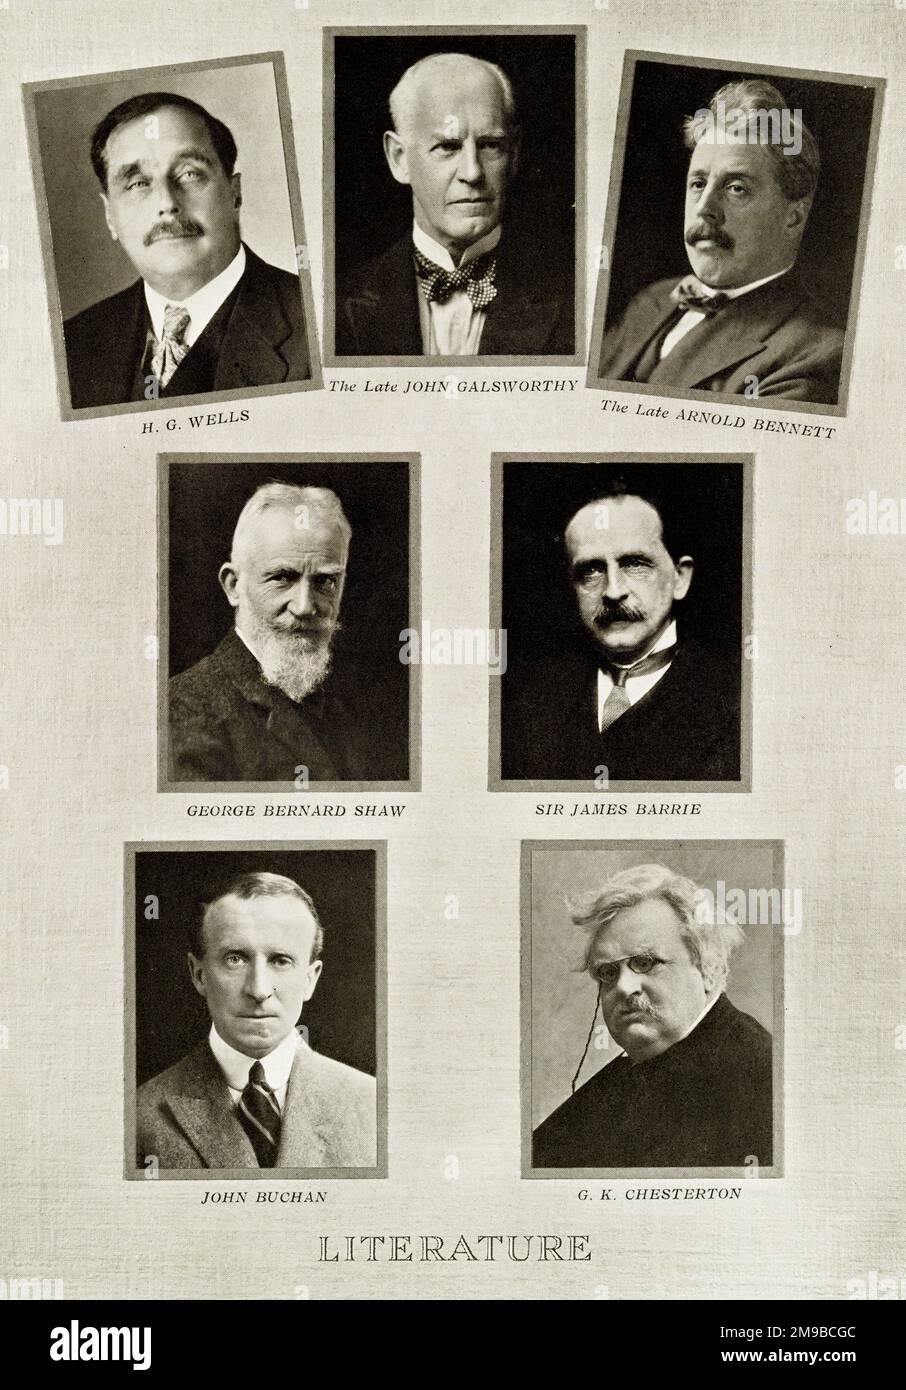 Leading authors and playwrights during the first 25 years of the reign of King George V: Wells, Galsworthy, Bennett, Shaw, Barrie, Buchan, Chesterton. Stock Photo